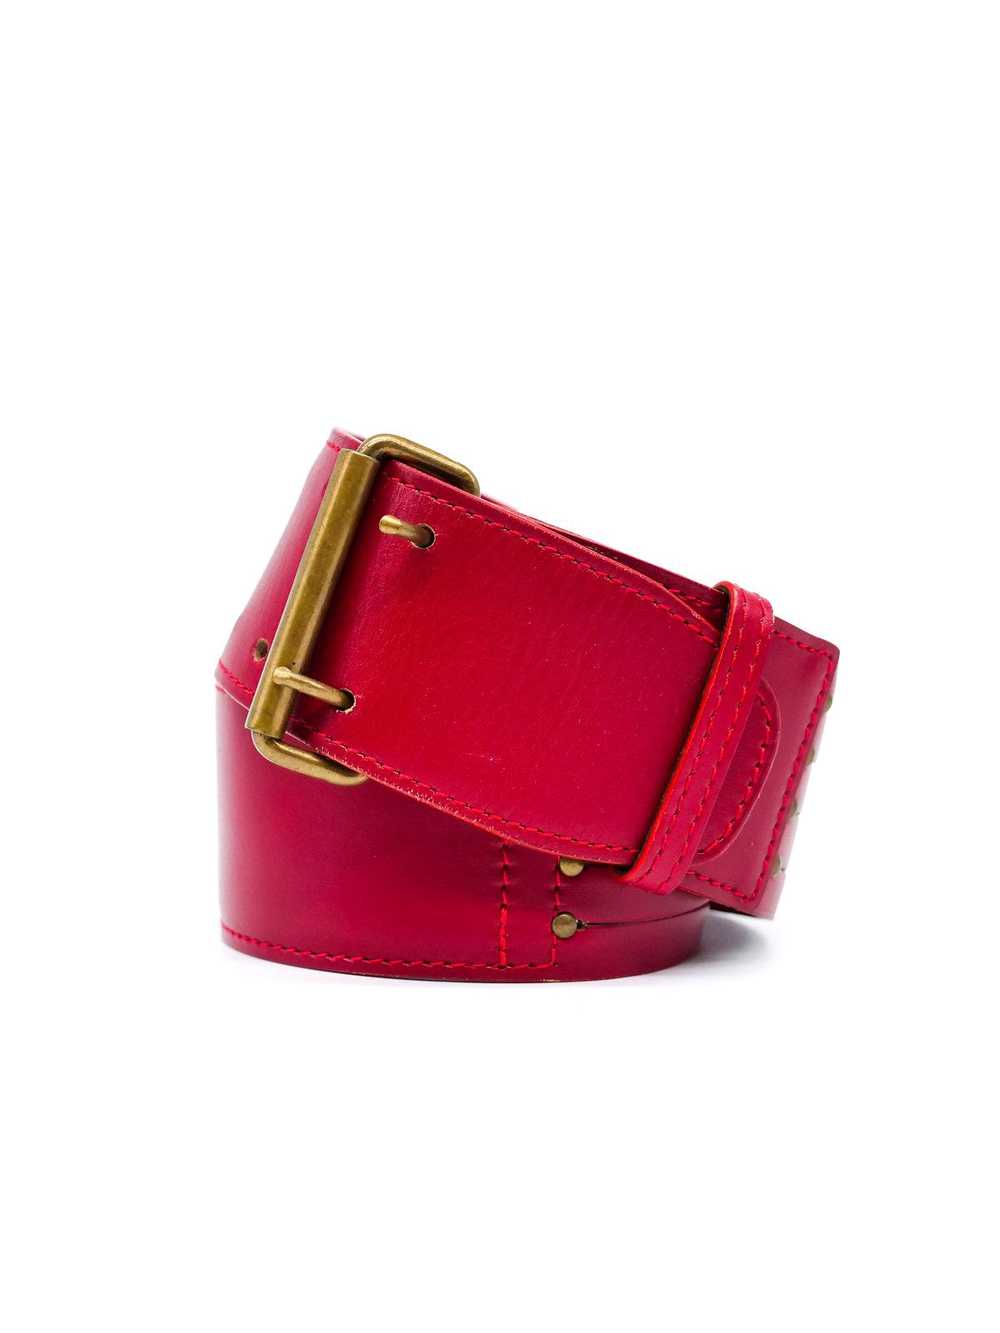 Alaia Perforated Red Leather Belt - image 3